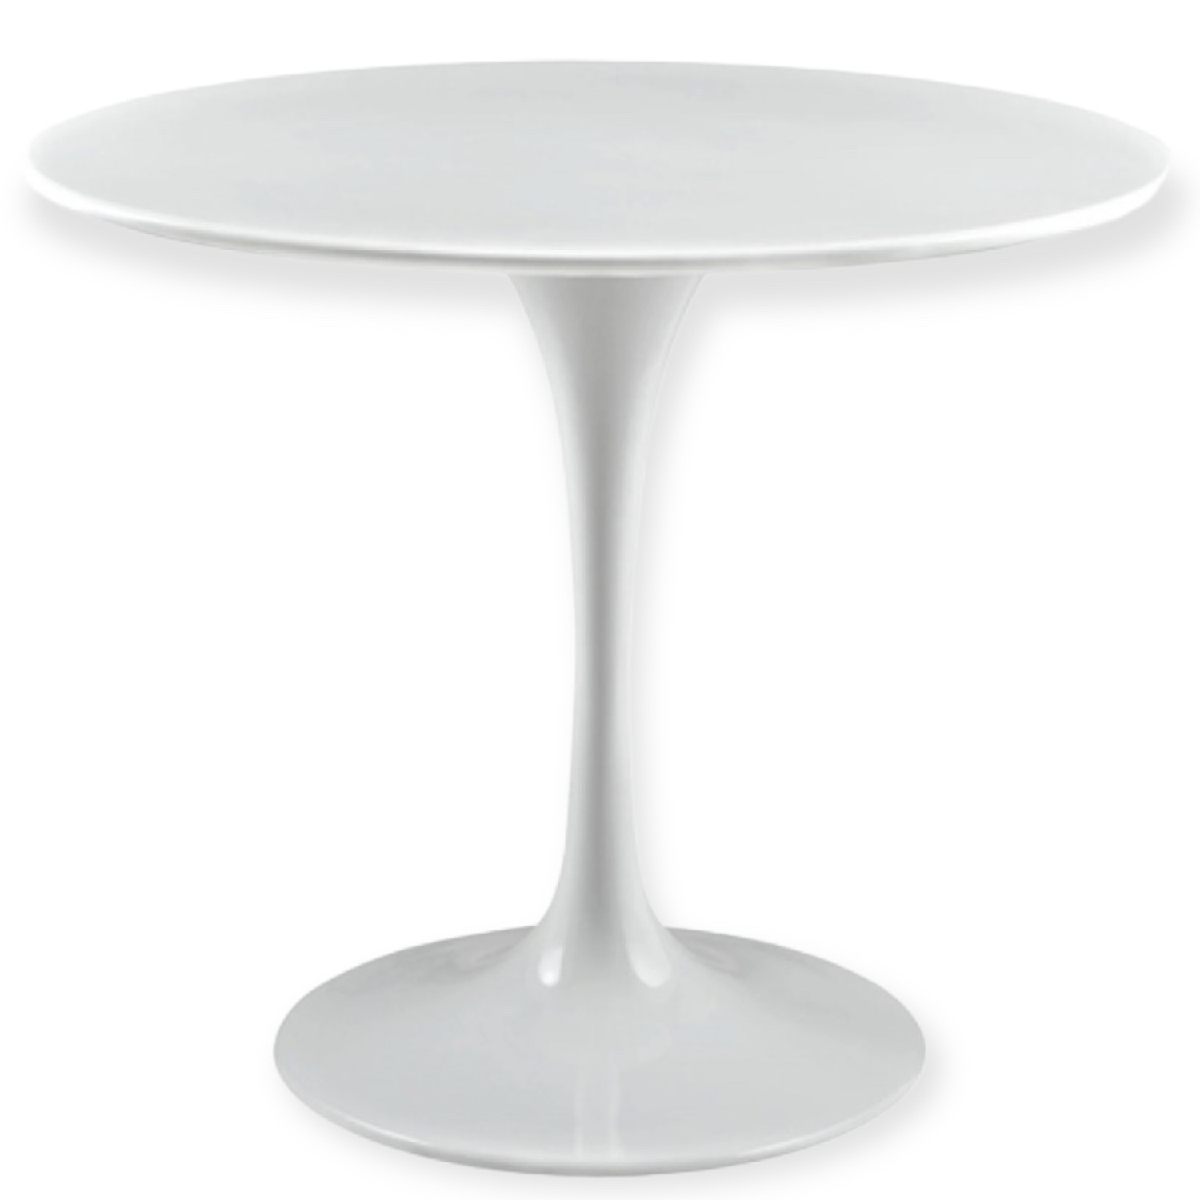 COCKTAIL TABLES - cocktail table image